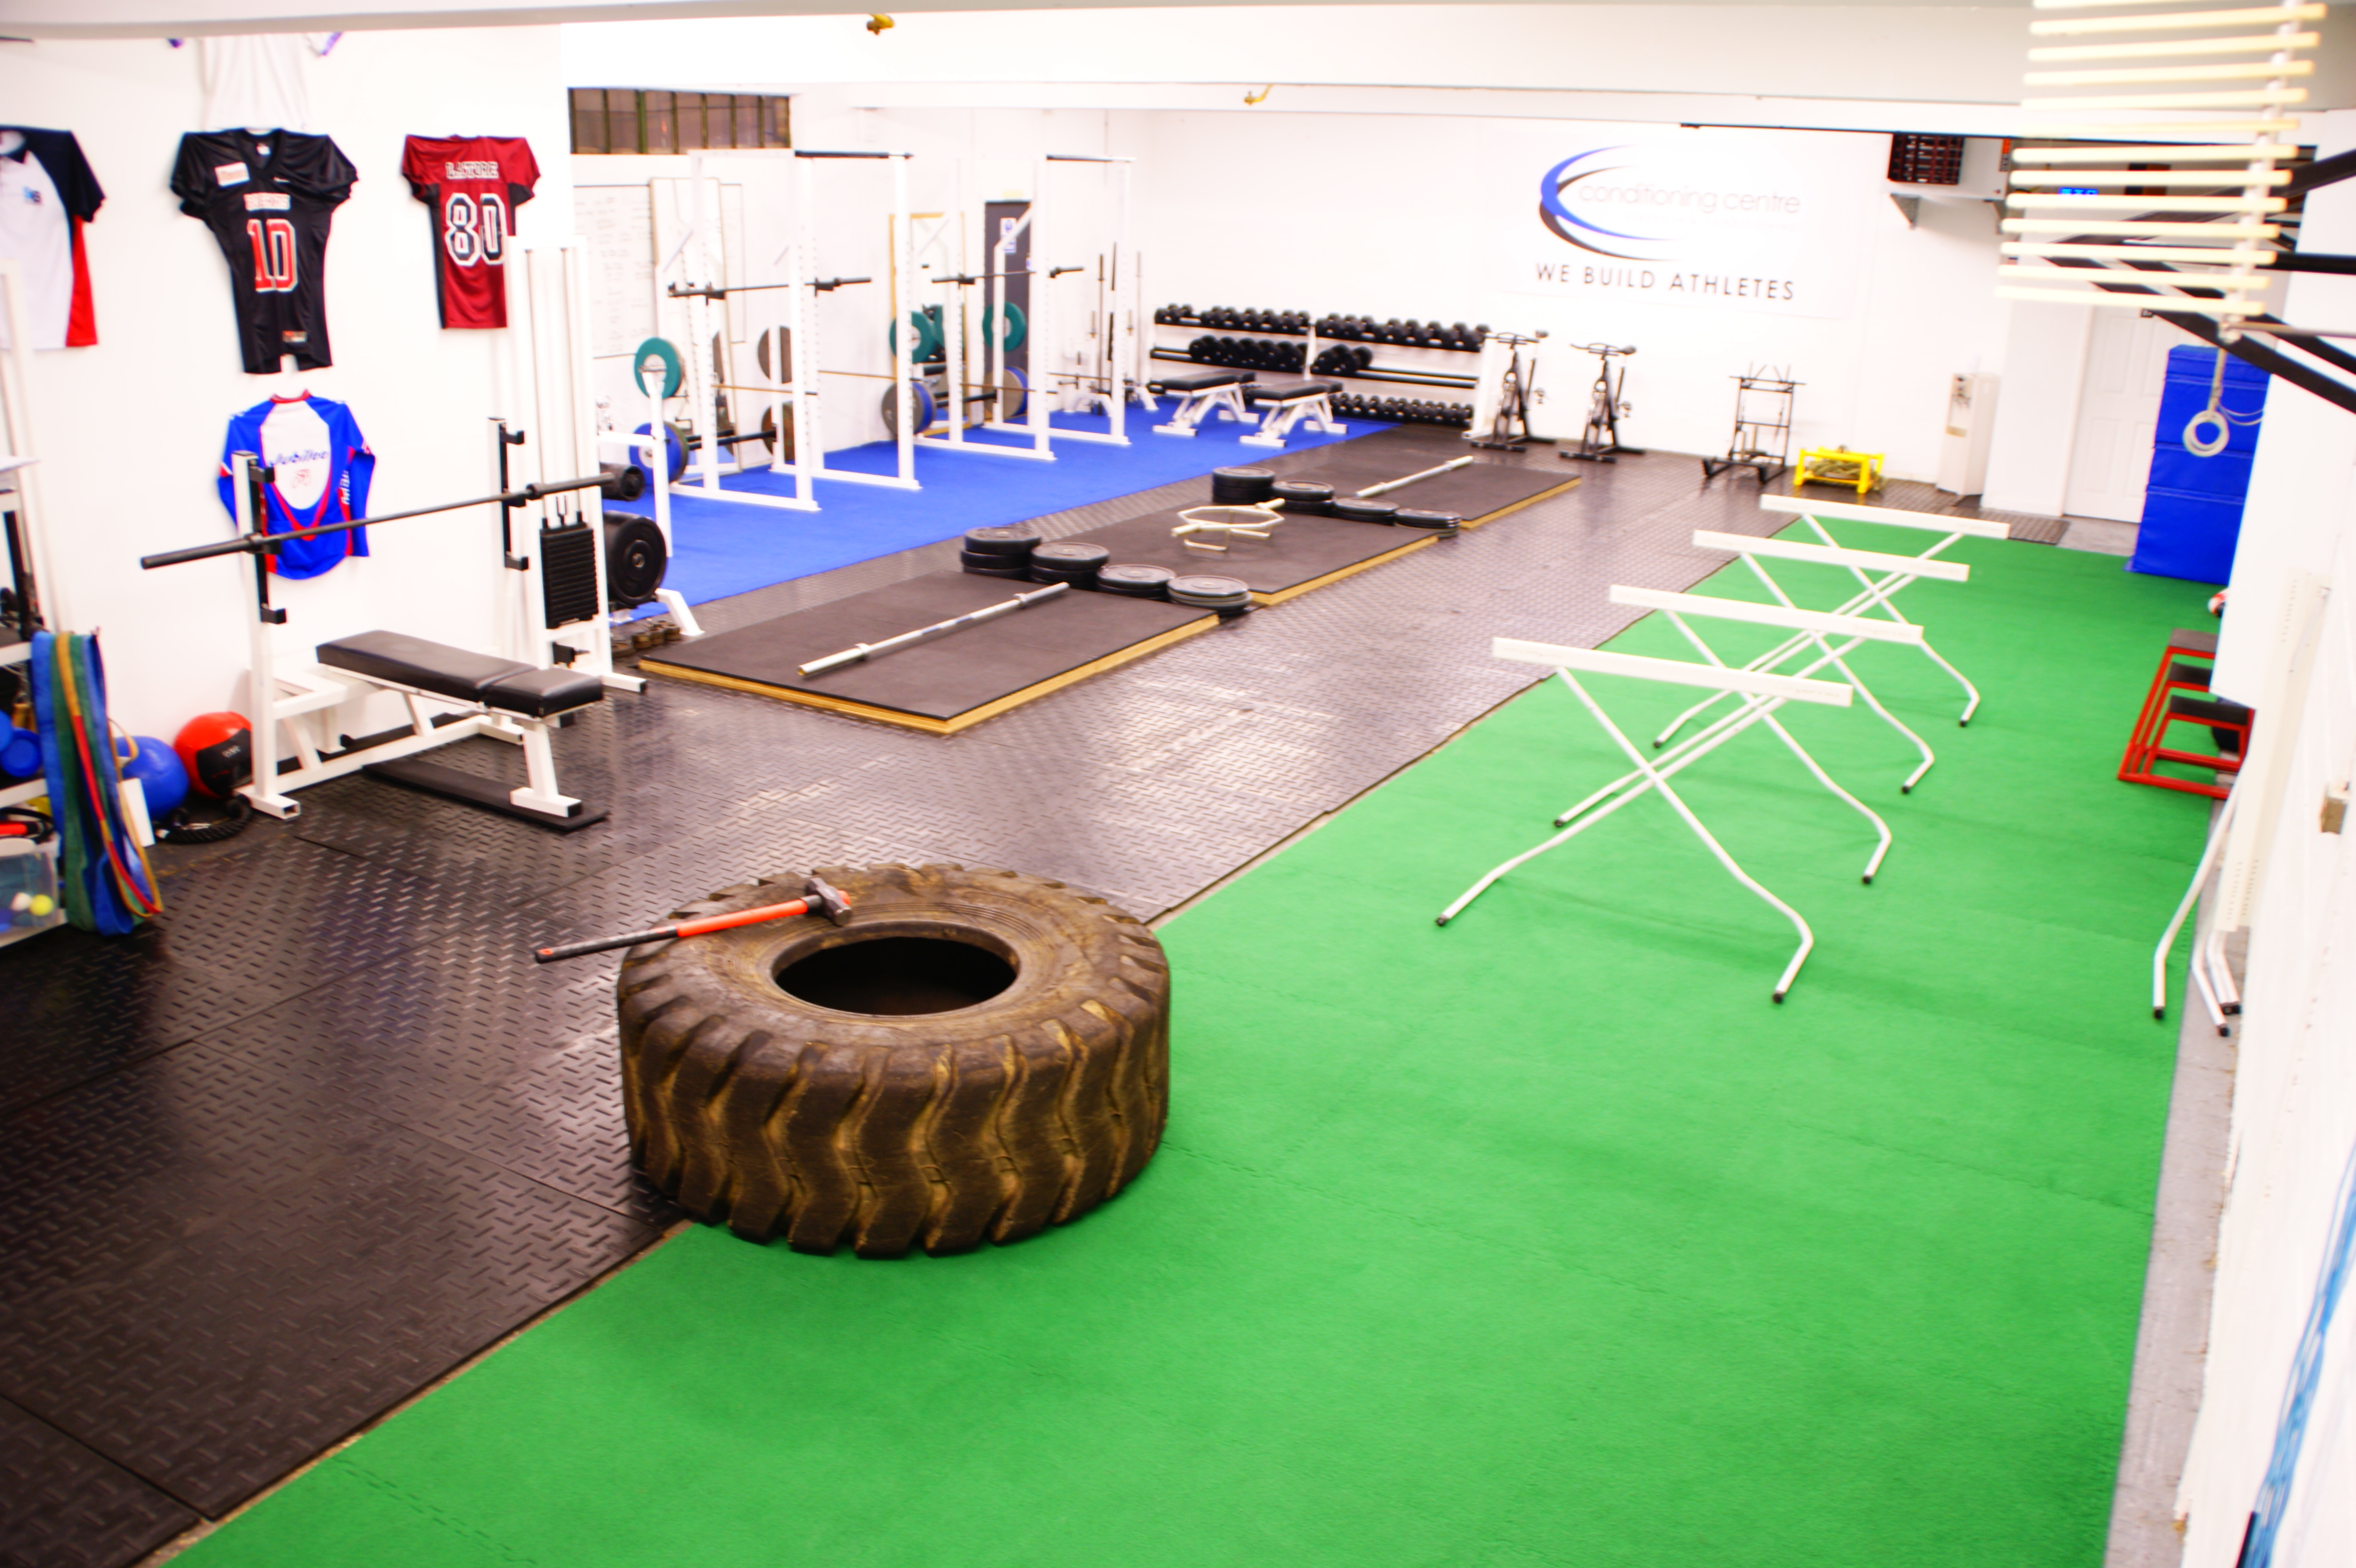 The Conditioning Centre